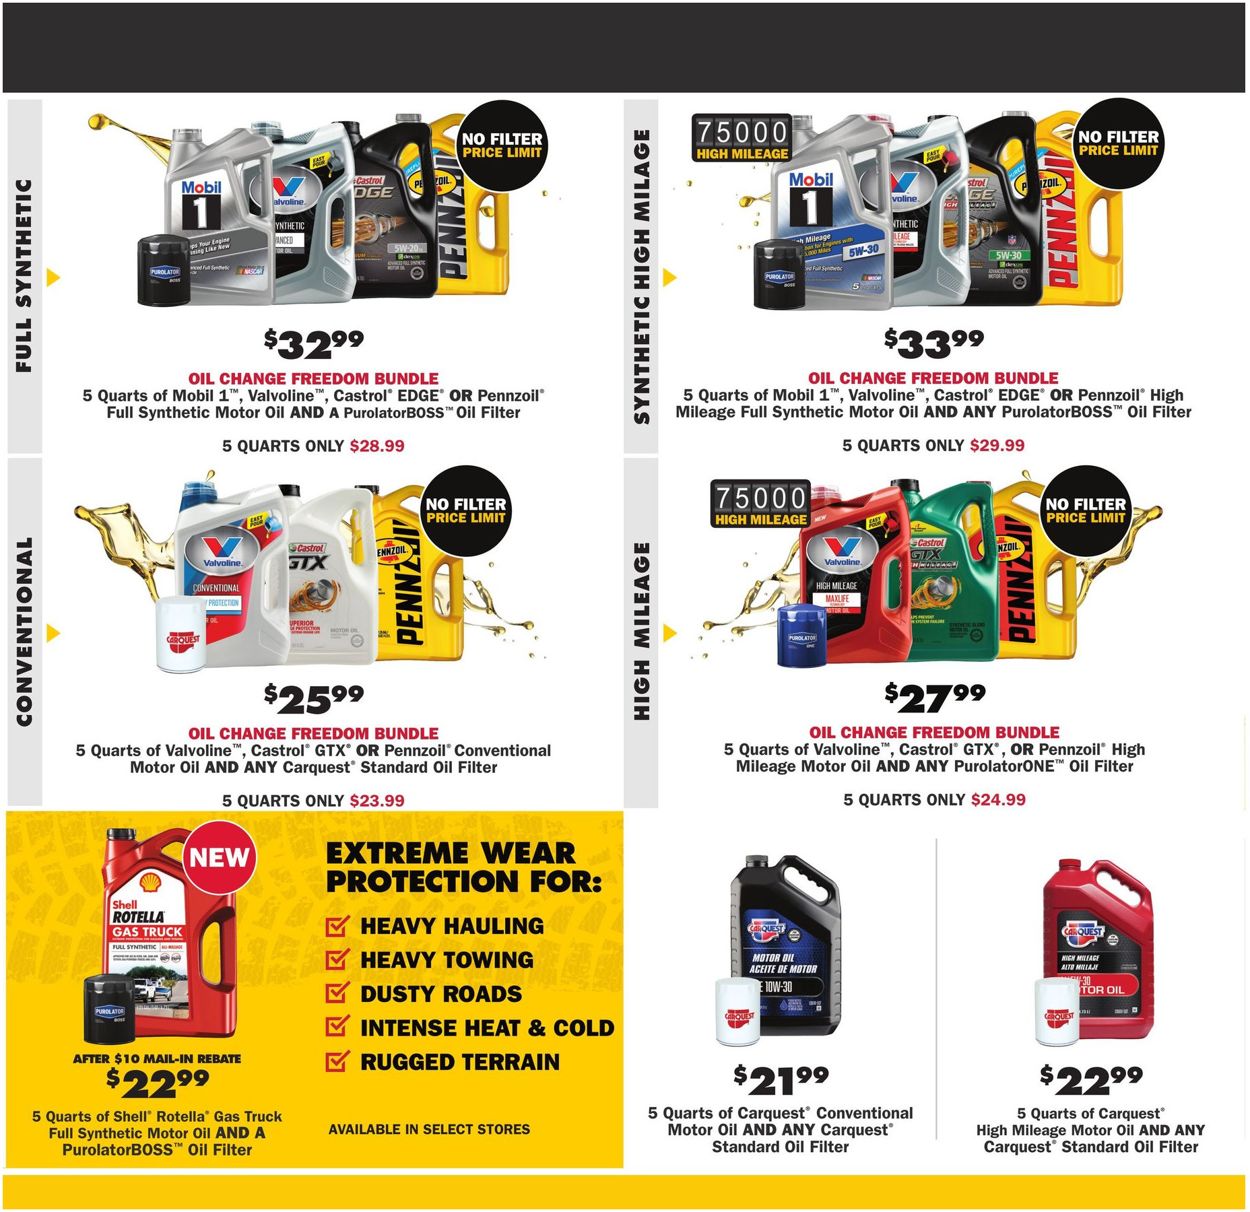 Advance Auto Parts Ad from 03/28/2019